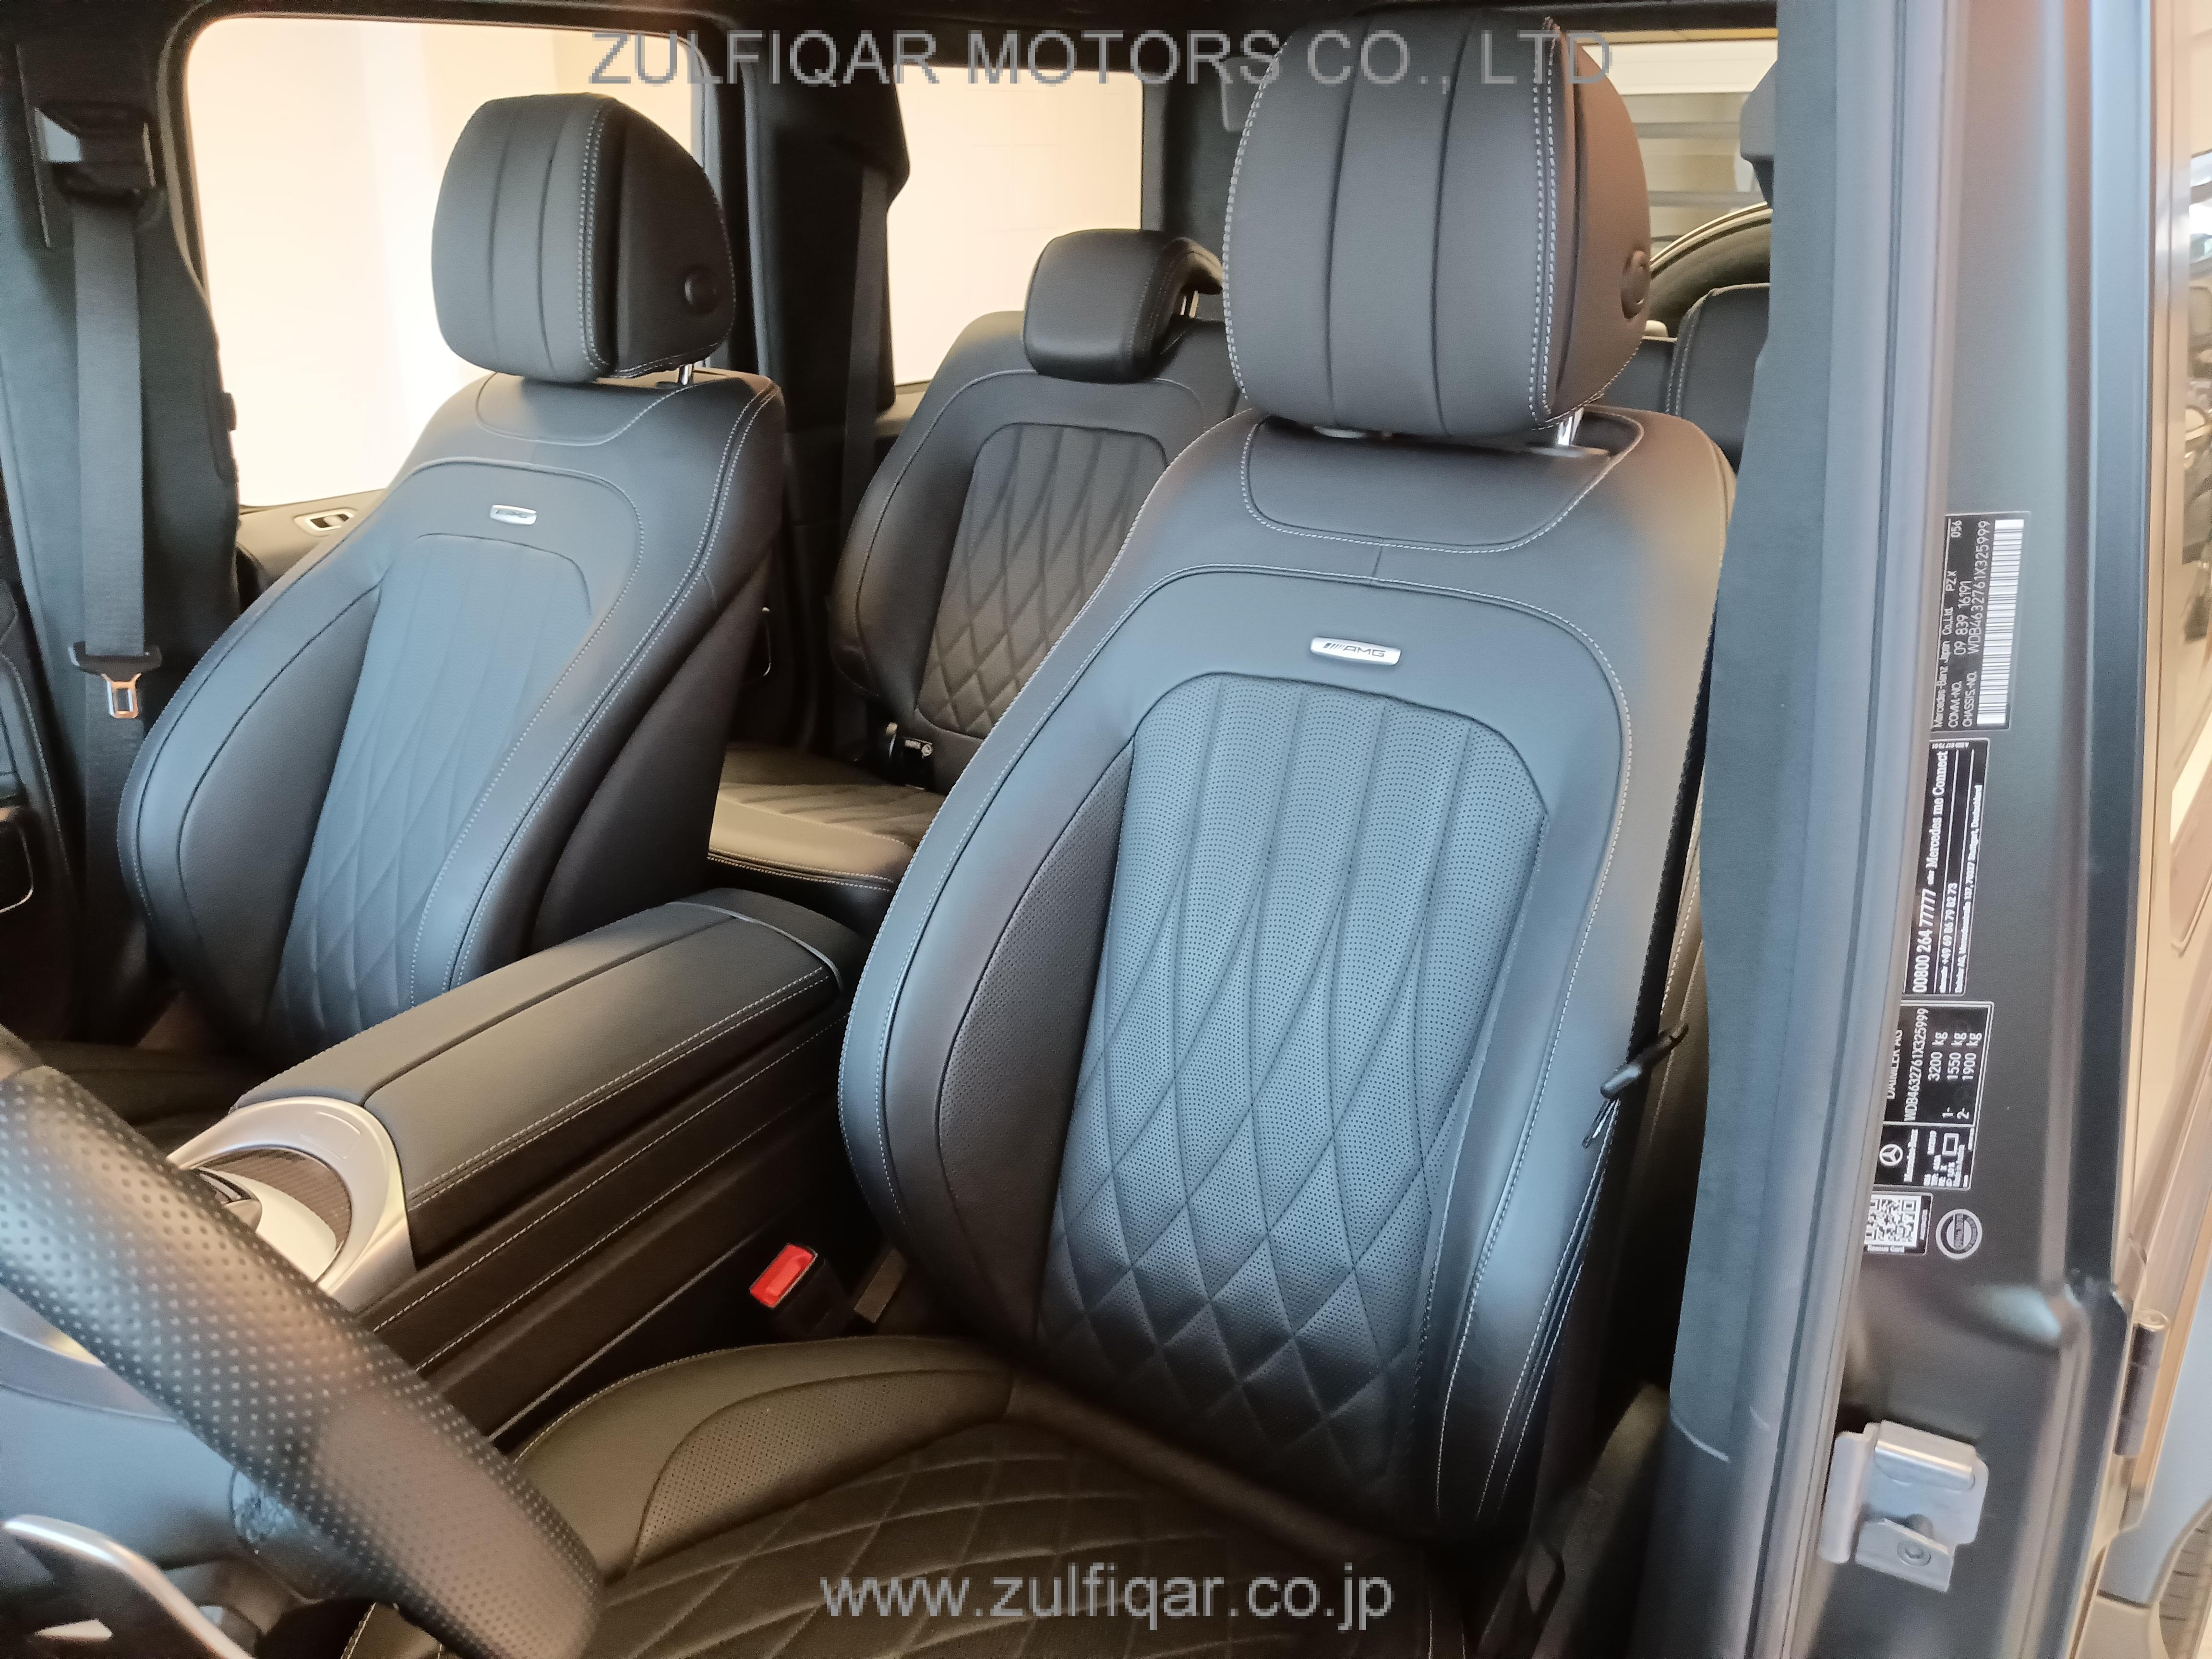 MERCEDES AMG G CLASS 2019 Image 38